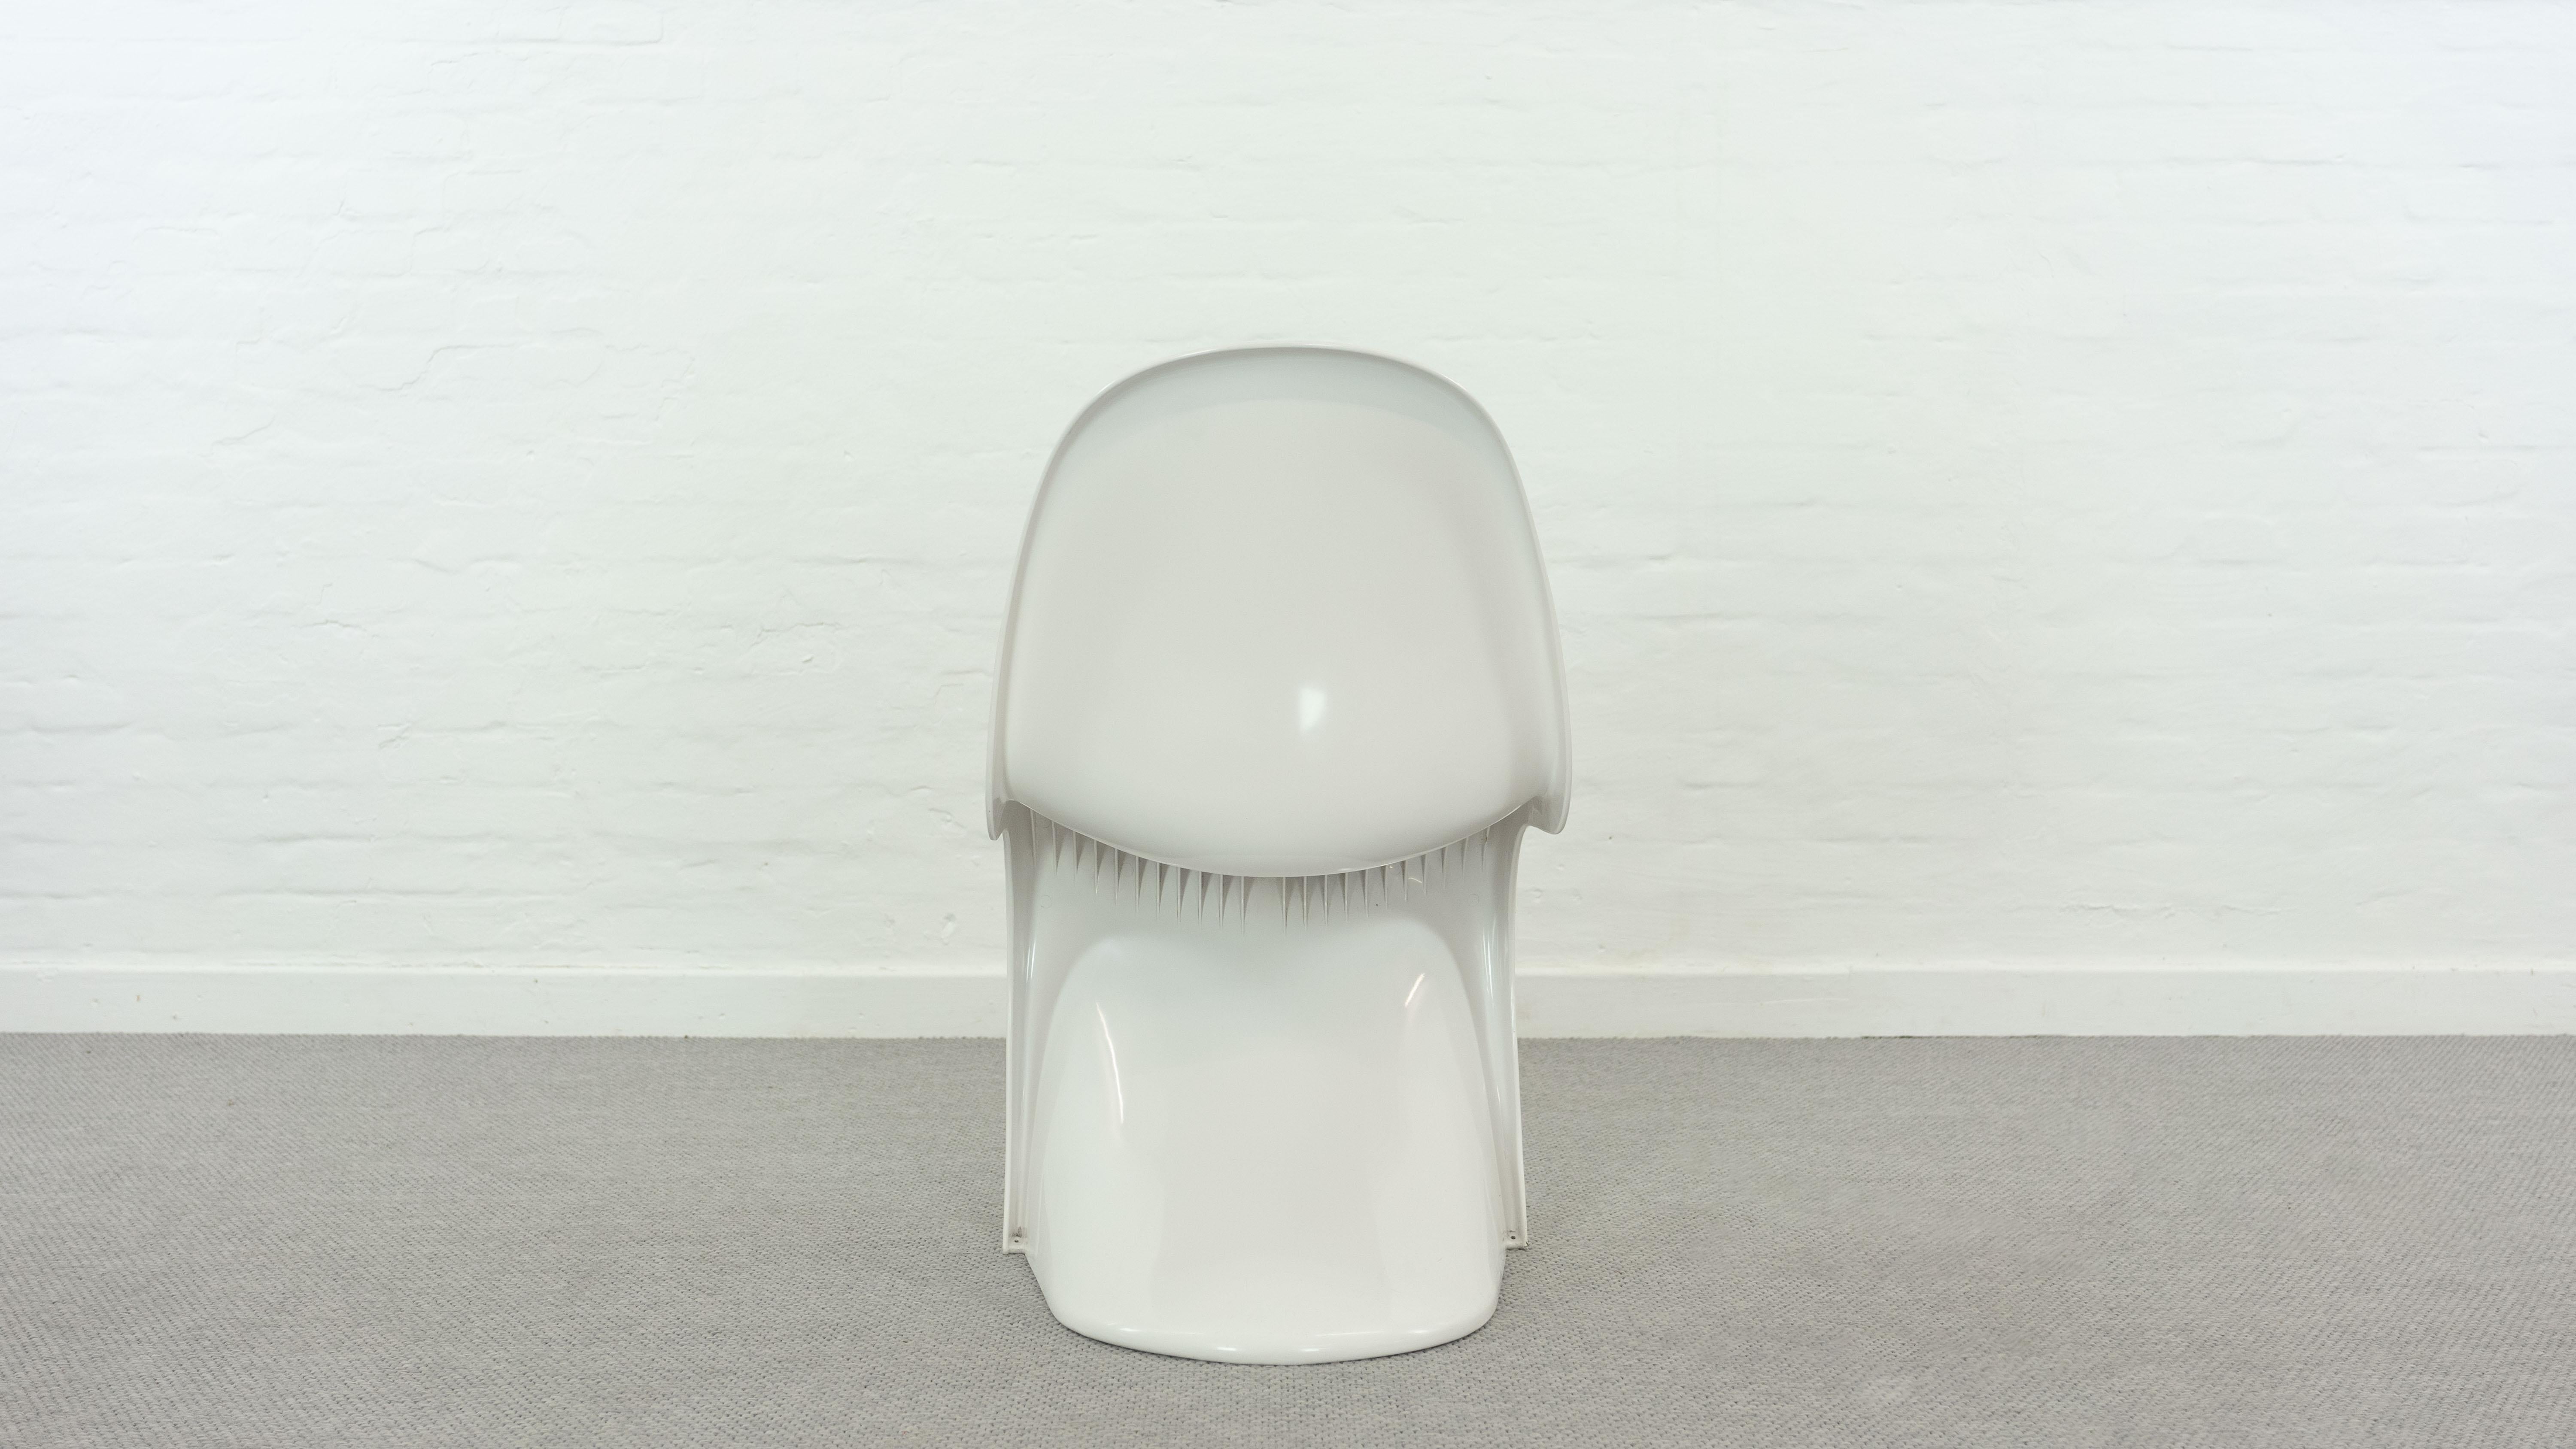 Panton Chair by Verner Panton for Herman Miller / Fehlbaum, in white 1976 In Good Condition For Sale In Halle, DE